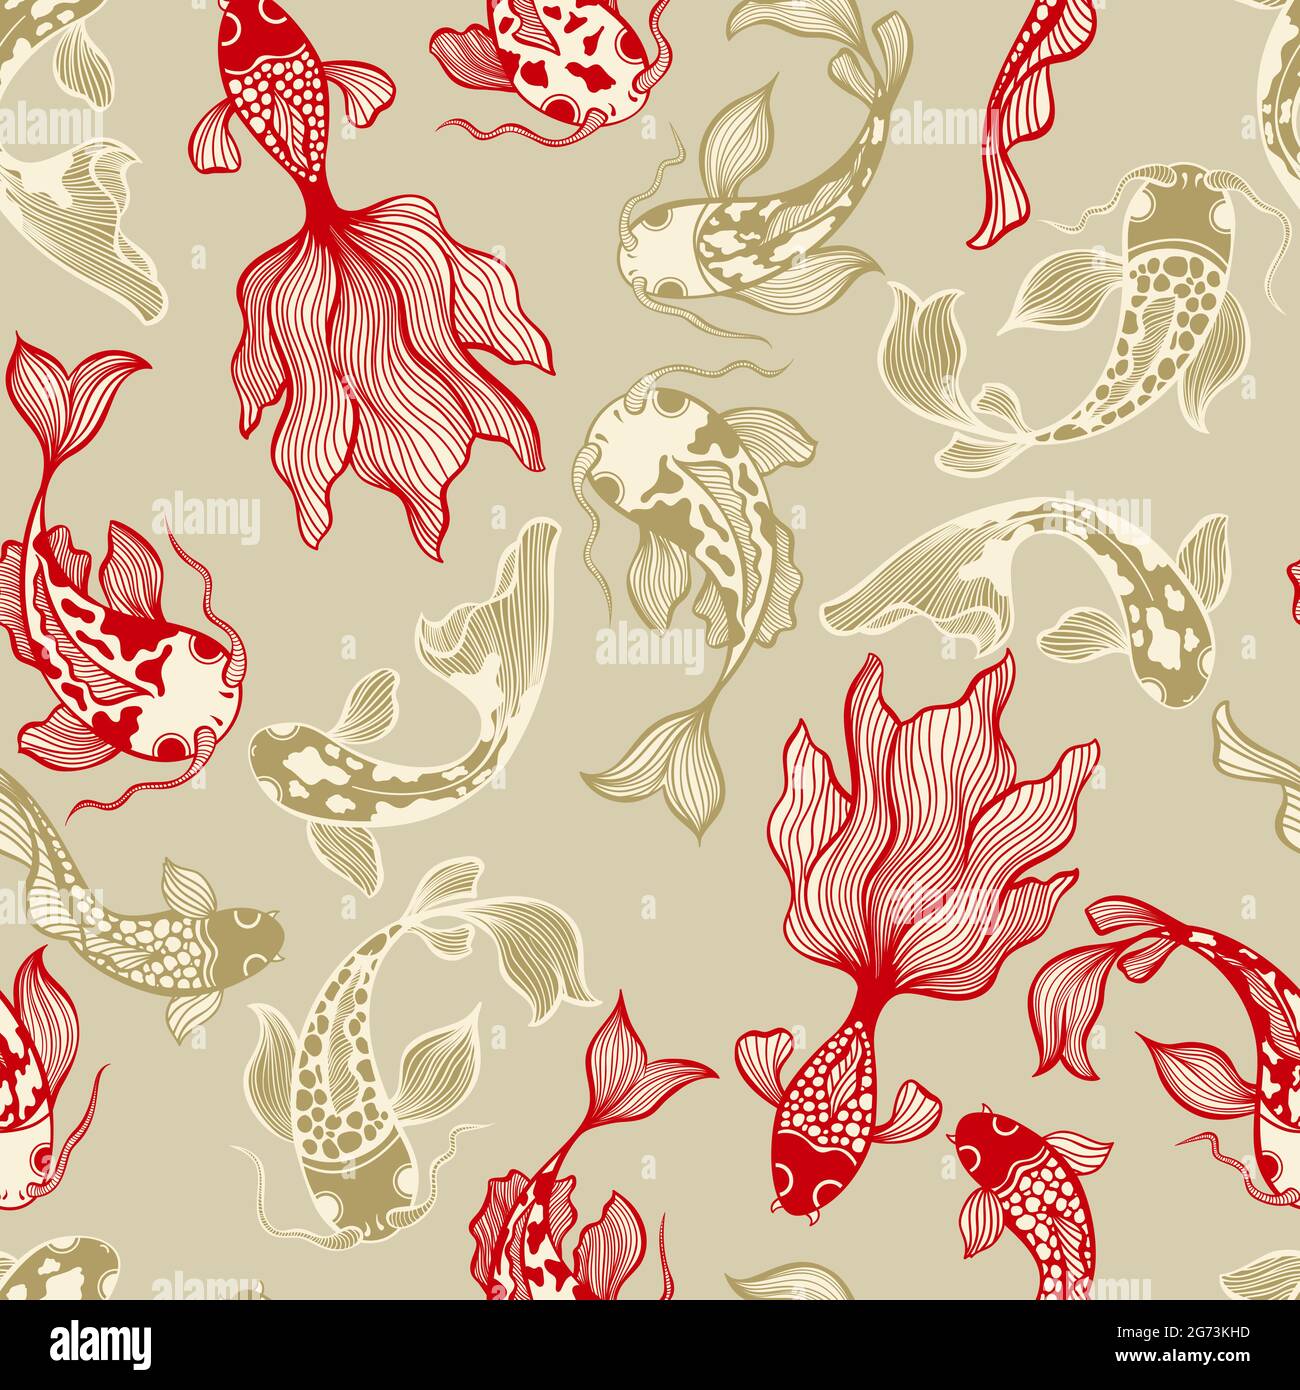 Japanese Koi Fish Vector Seamless Pattern in Neutral Colors Stock Vector